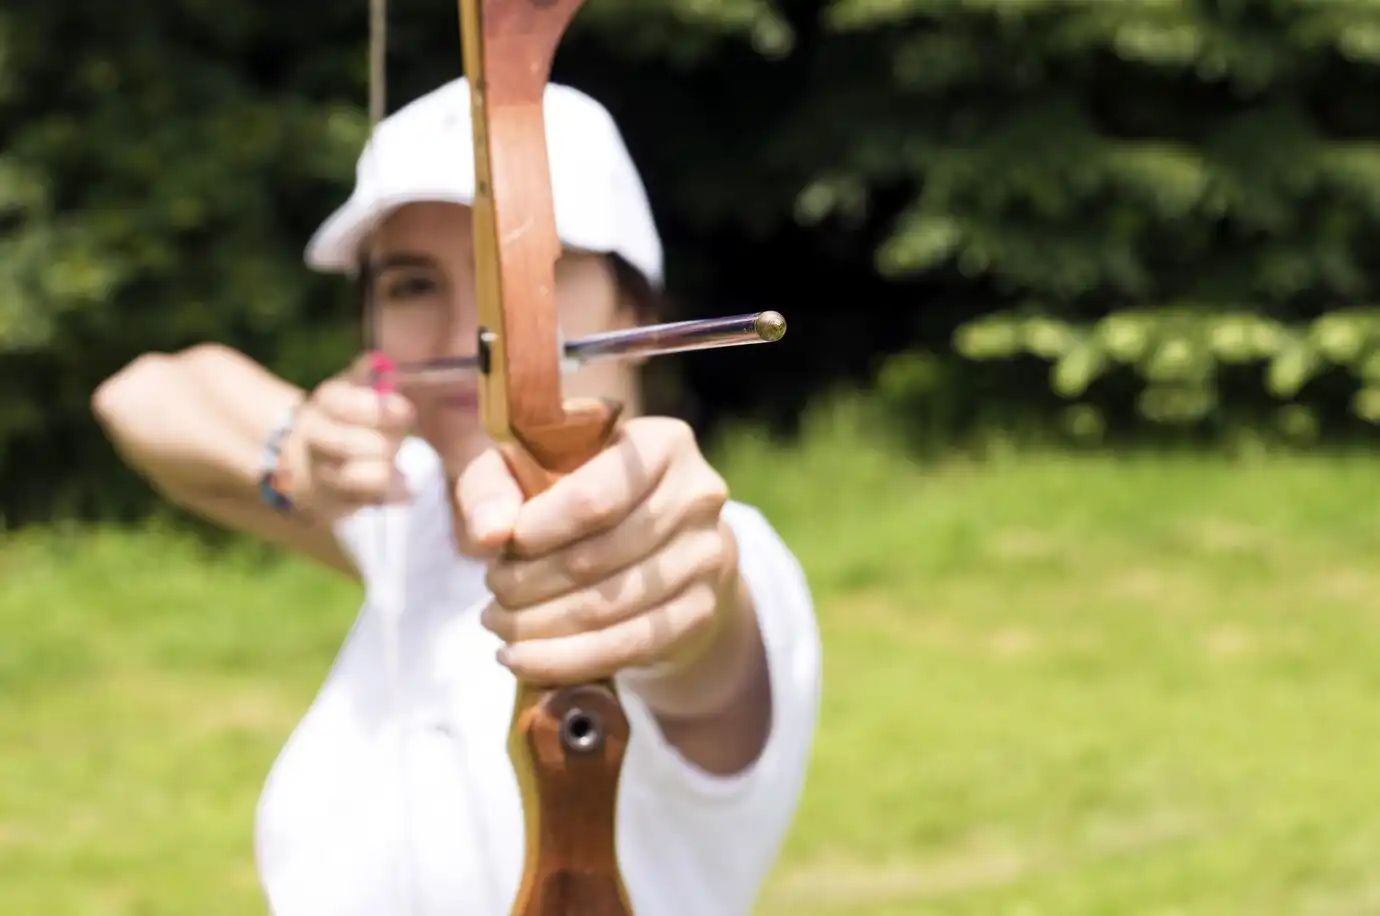 blurred-shot-female-archer-holding-wooden-bow-aiming-target_181624-40397